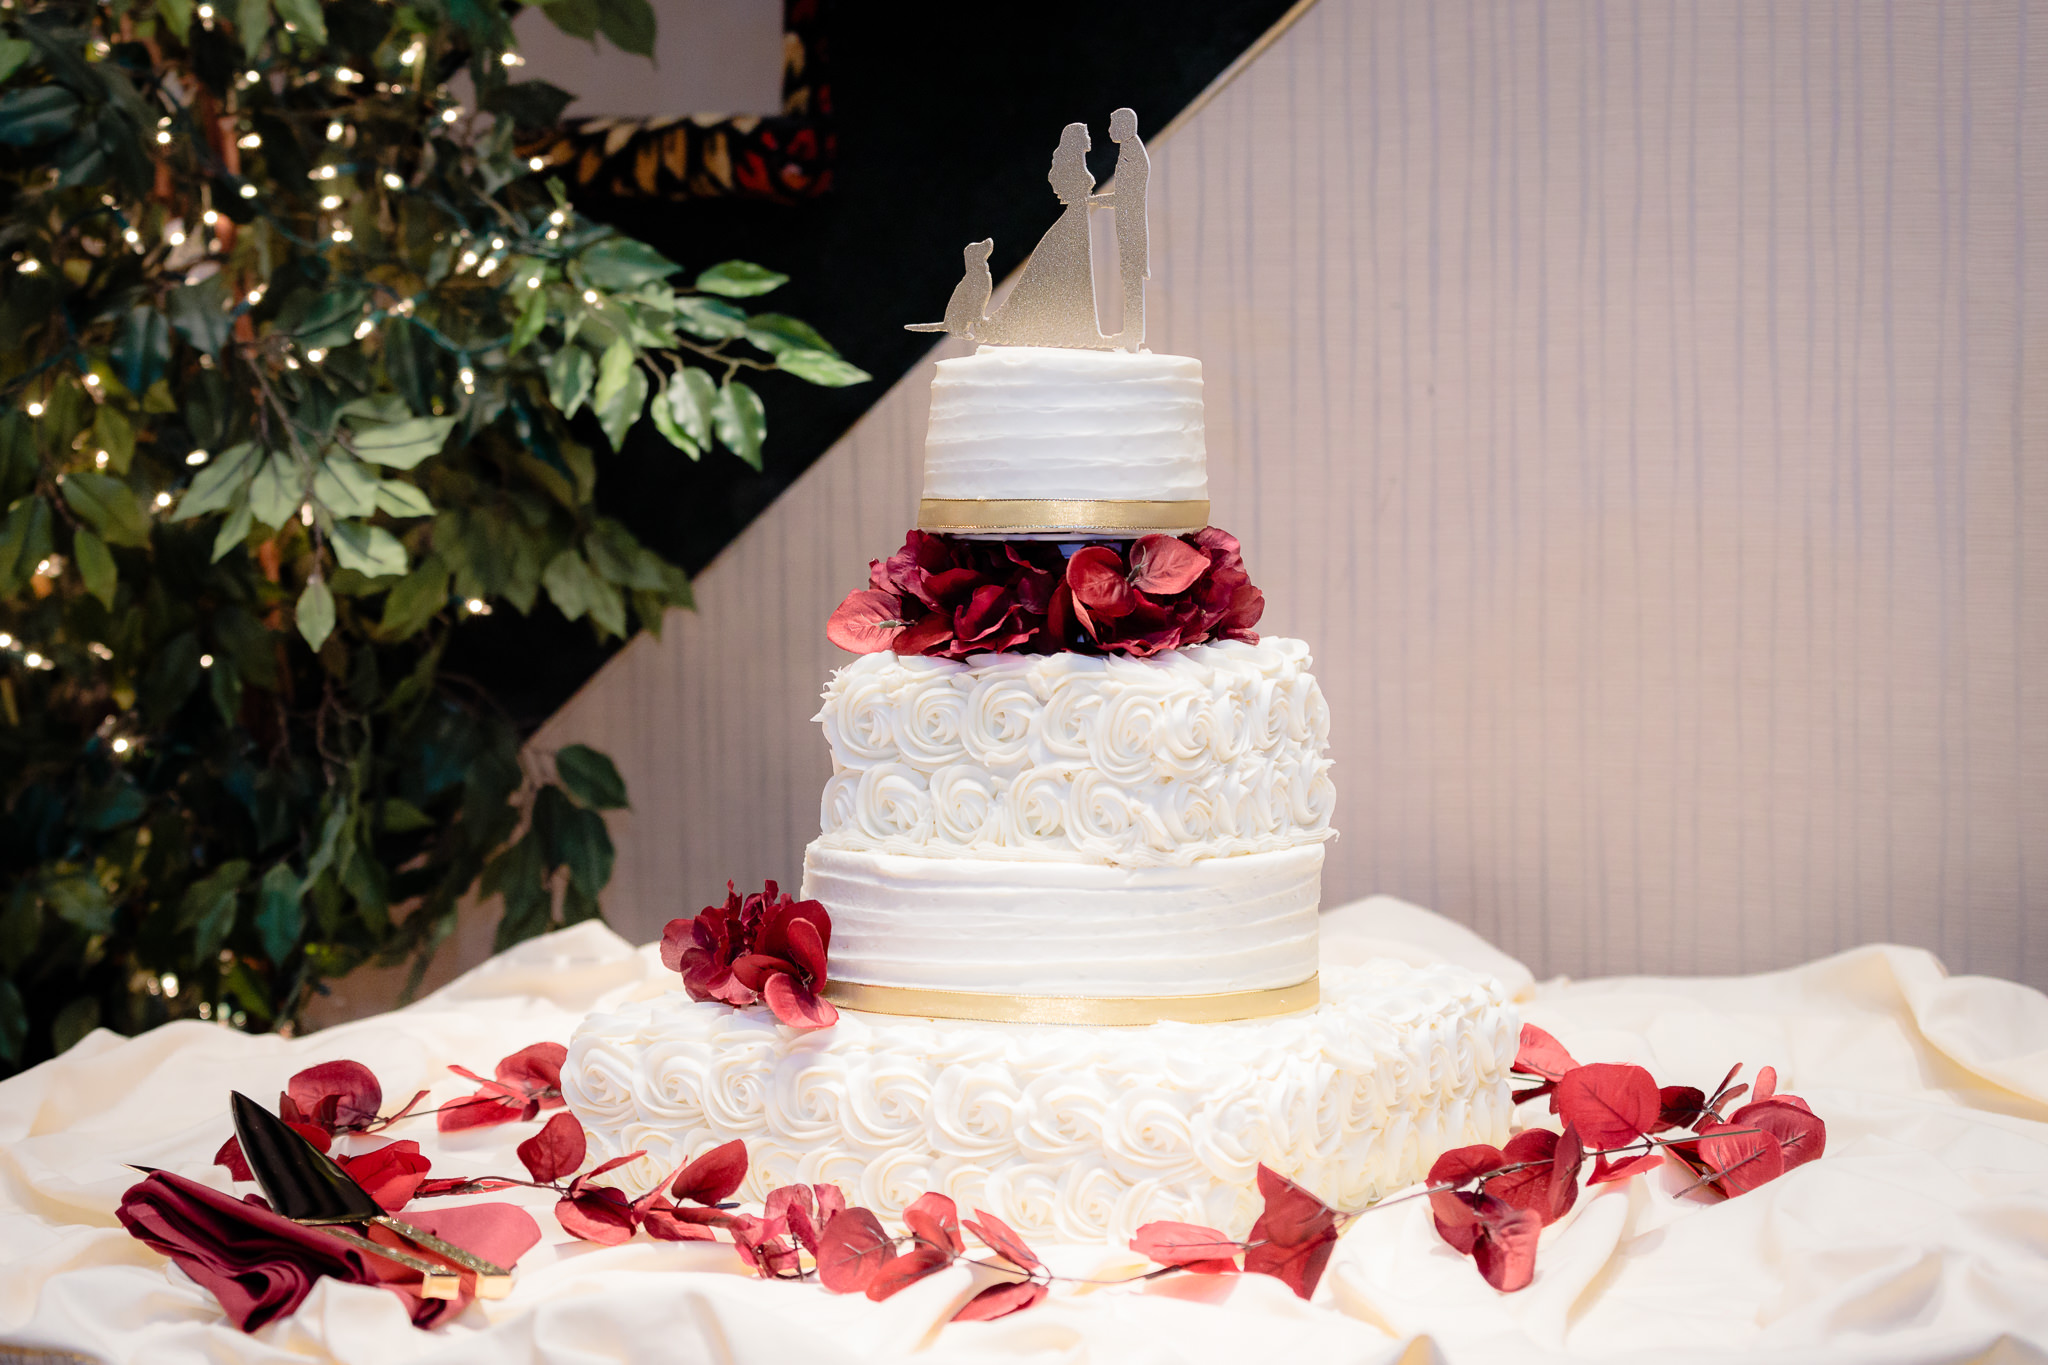 Wedding cake decorated with red fall leaves at the Fez